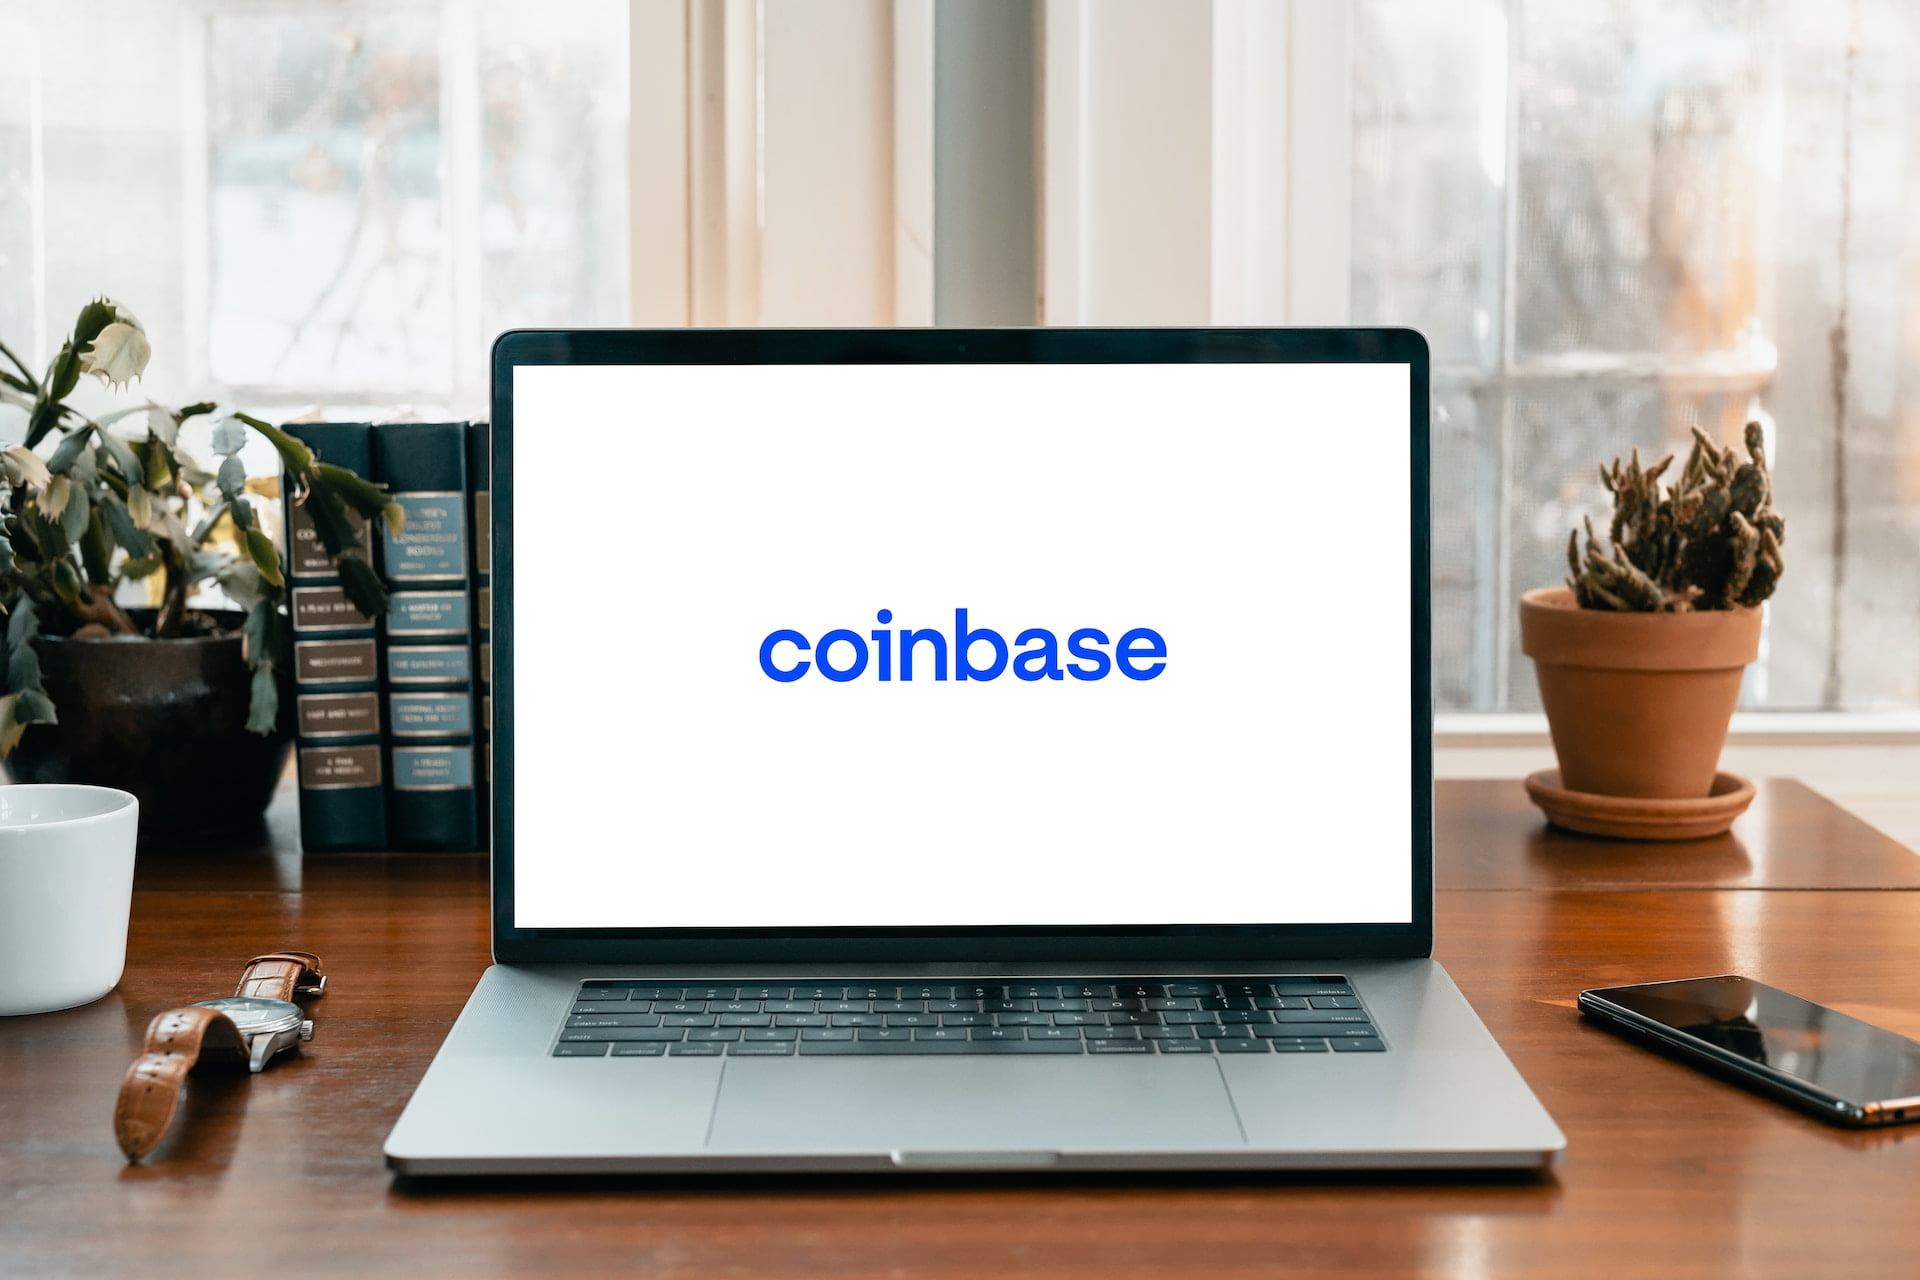 Coinbase Slams SEC for Lack of Transparency in Ongoing Legal Battle